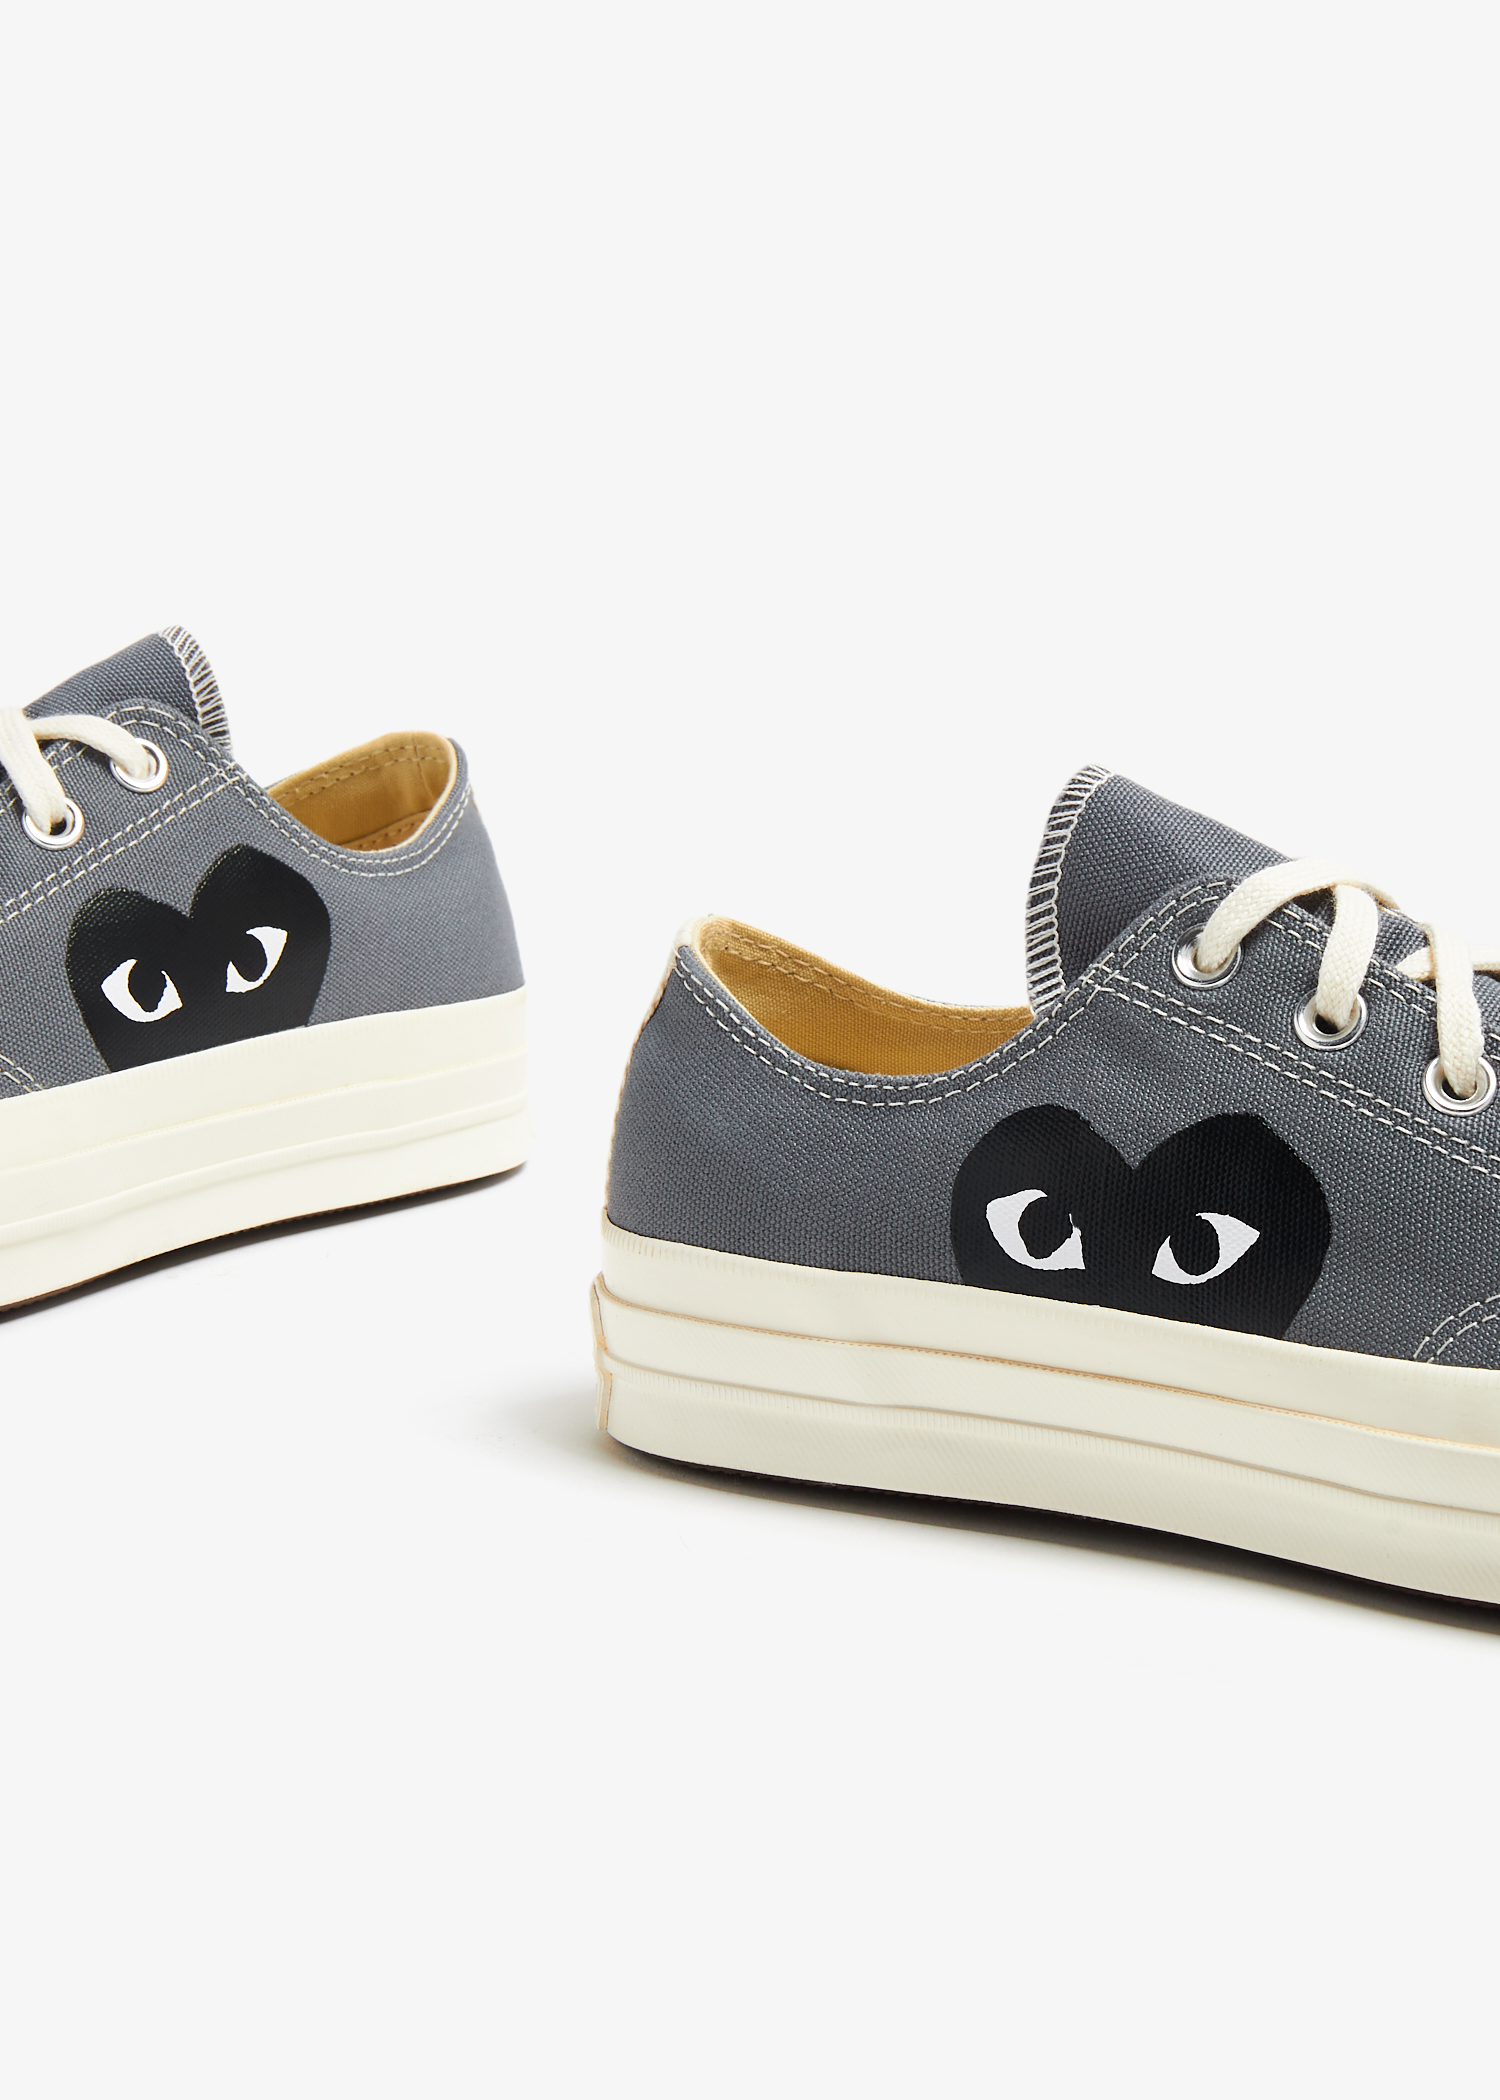 Comme des Garçons PLAY X Converse sneakers for Men - Grey in UAE 